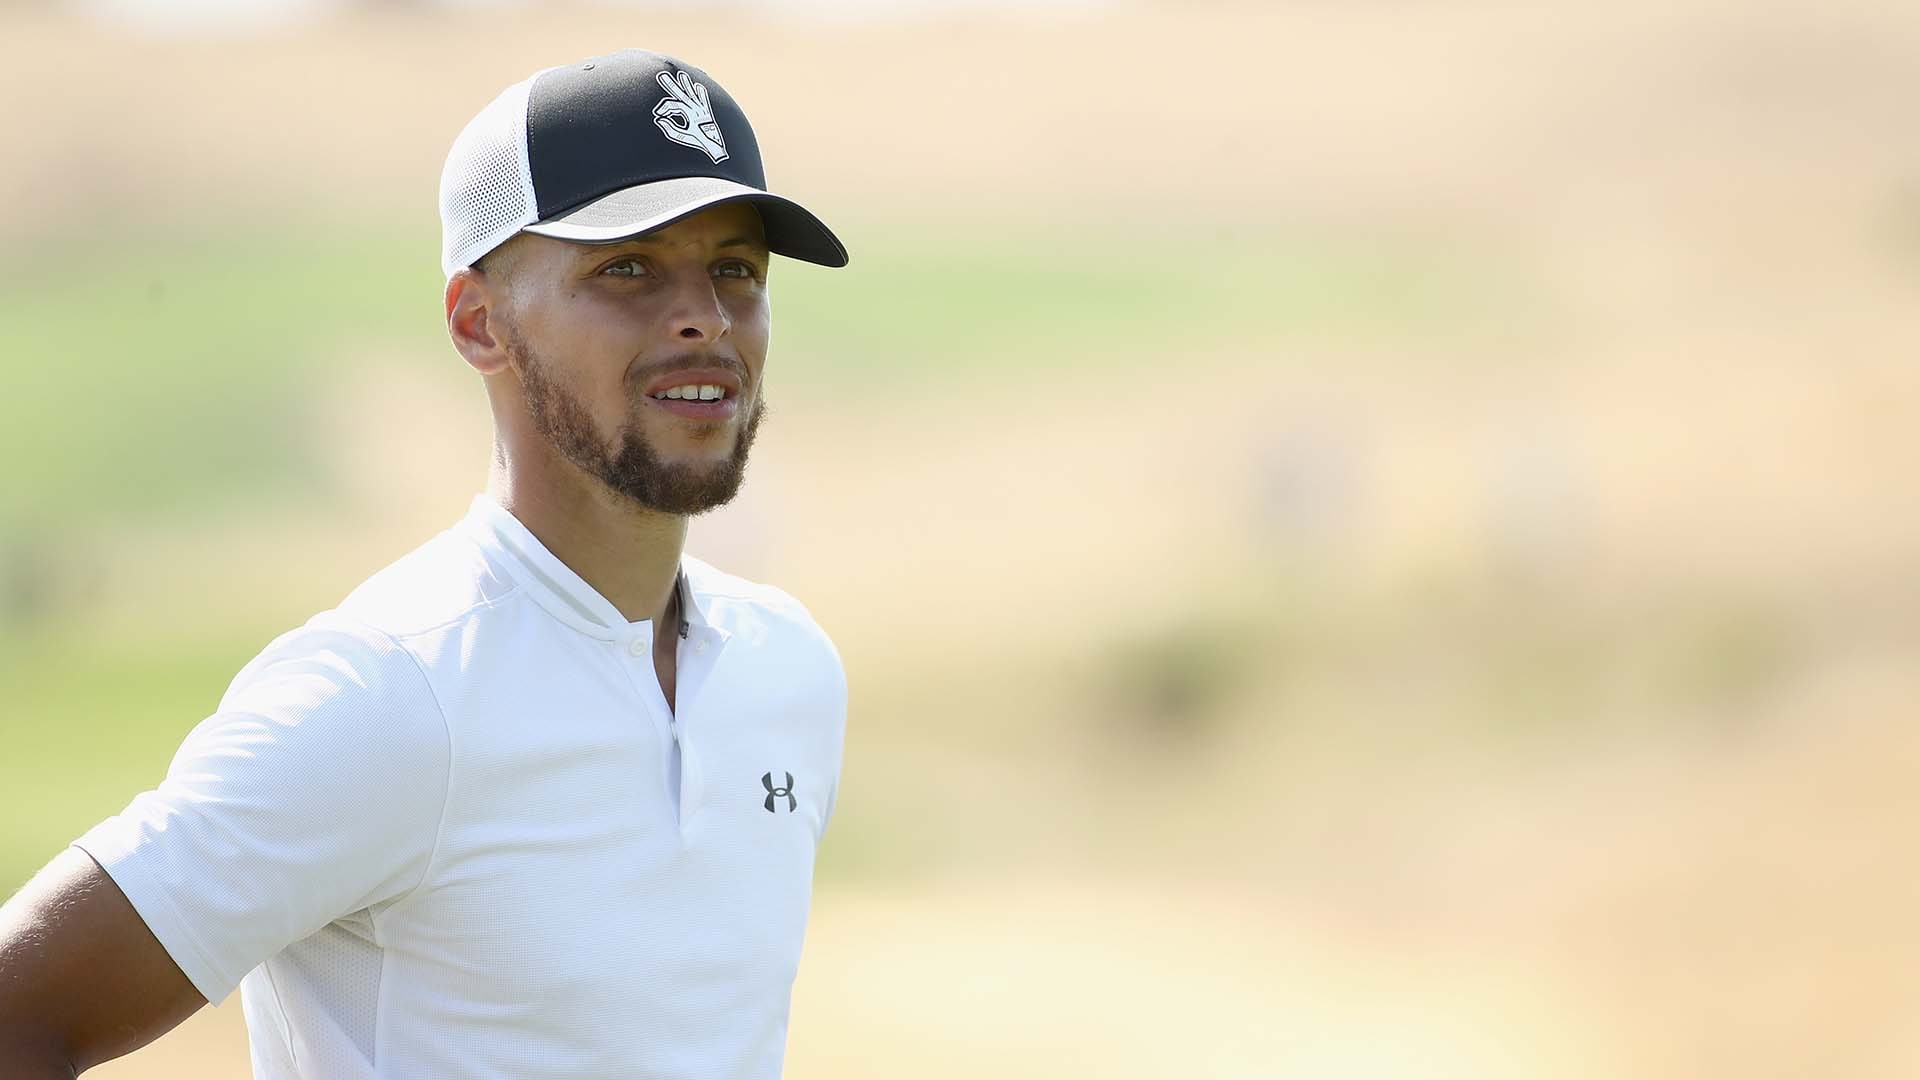 Memorial to benefit Stephen Curry’s foundation, raising question about TPC Harding Park